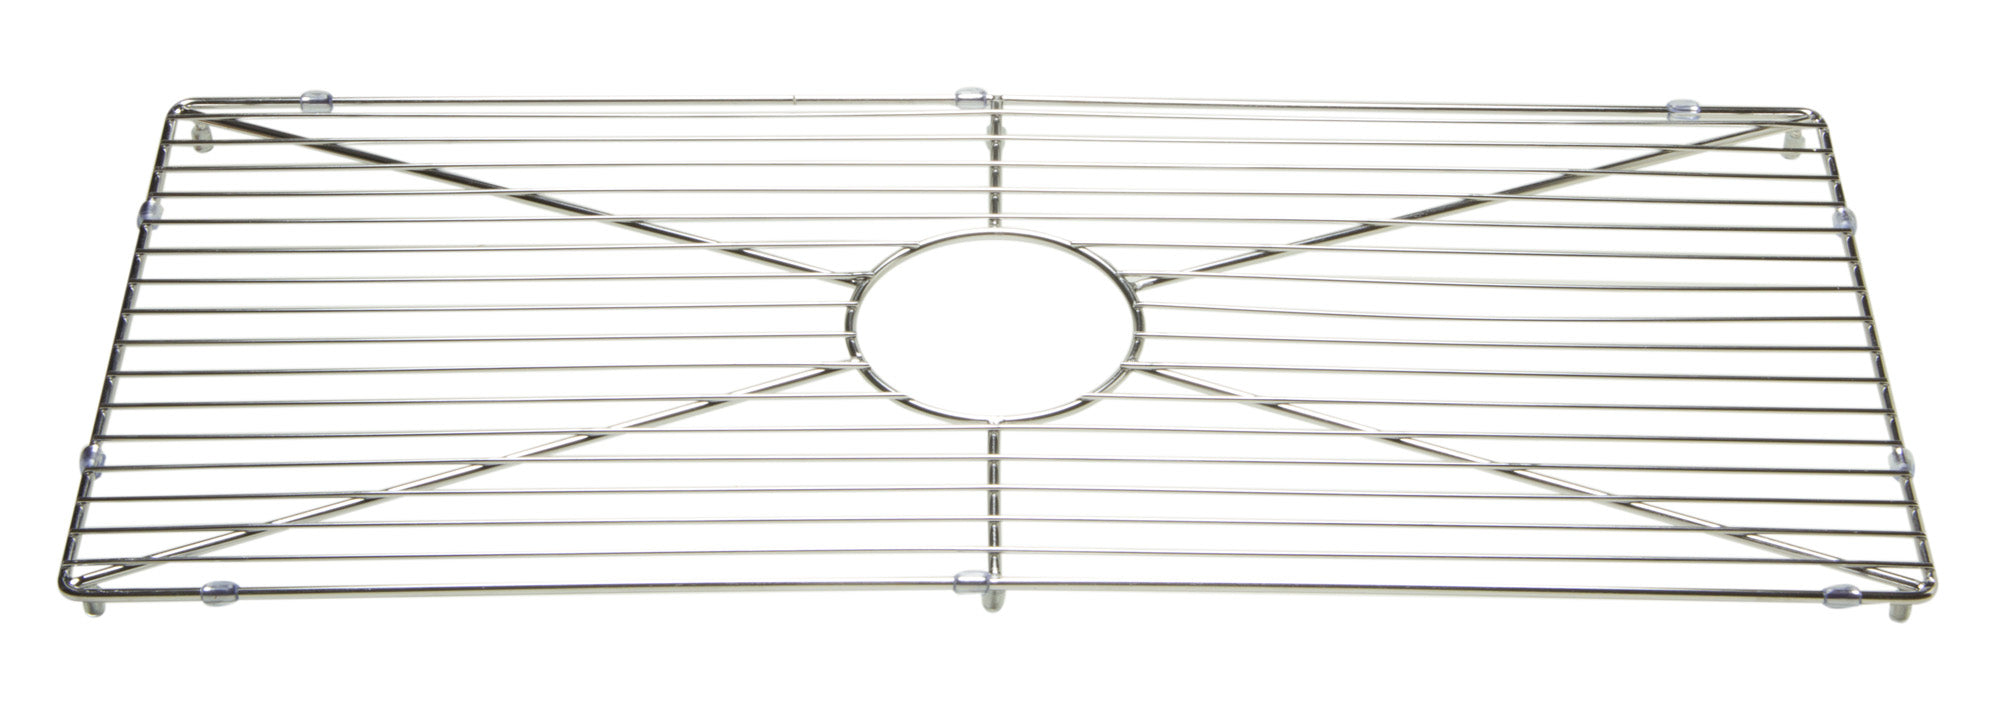 Stainless steel kitchen sink grid for AB3618HS-DirectSinks